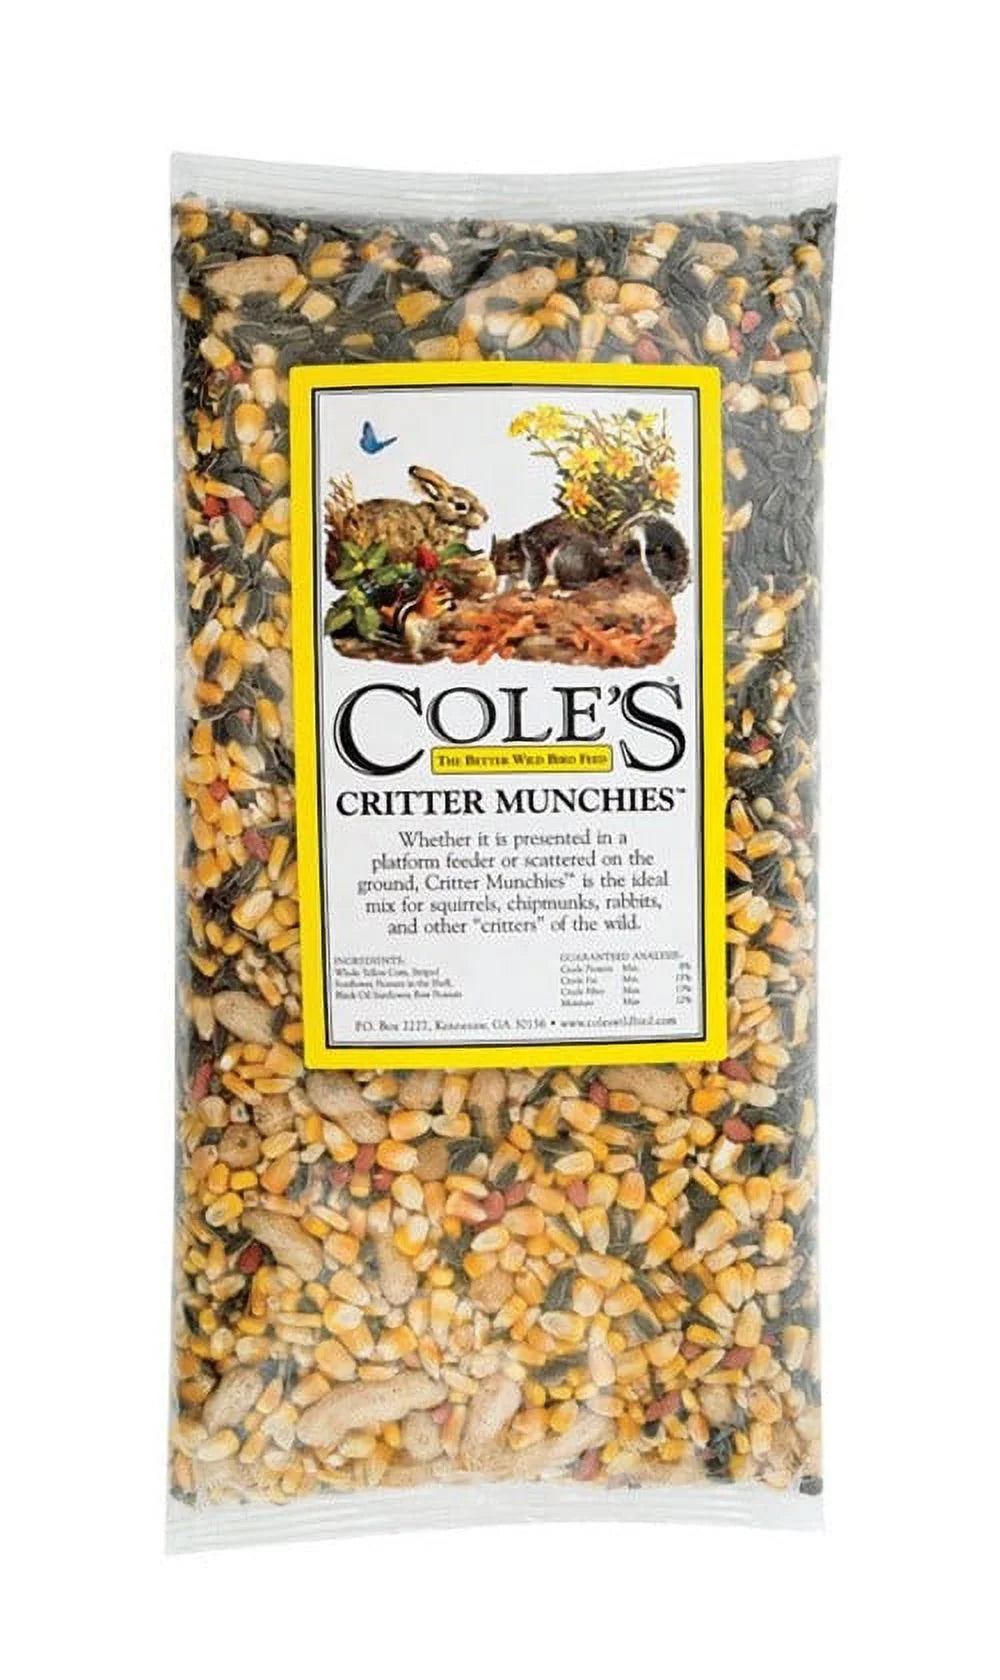 A fun mix of peanuts, corn and more great for Squirrels and Rabbits